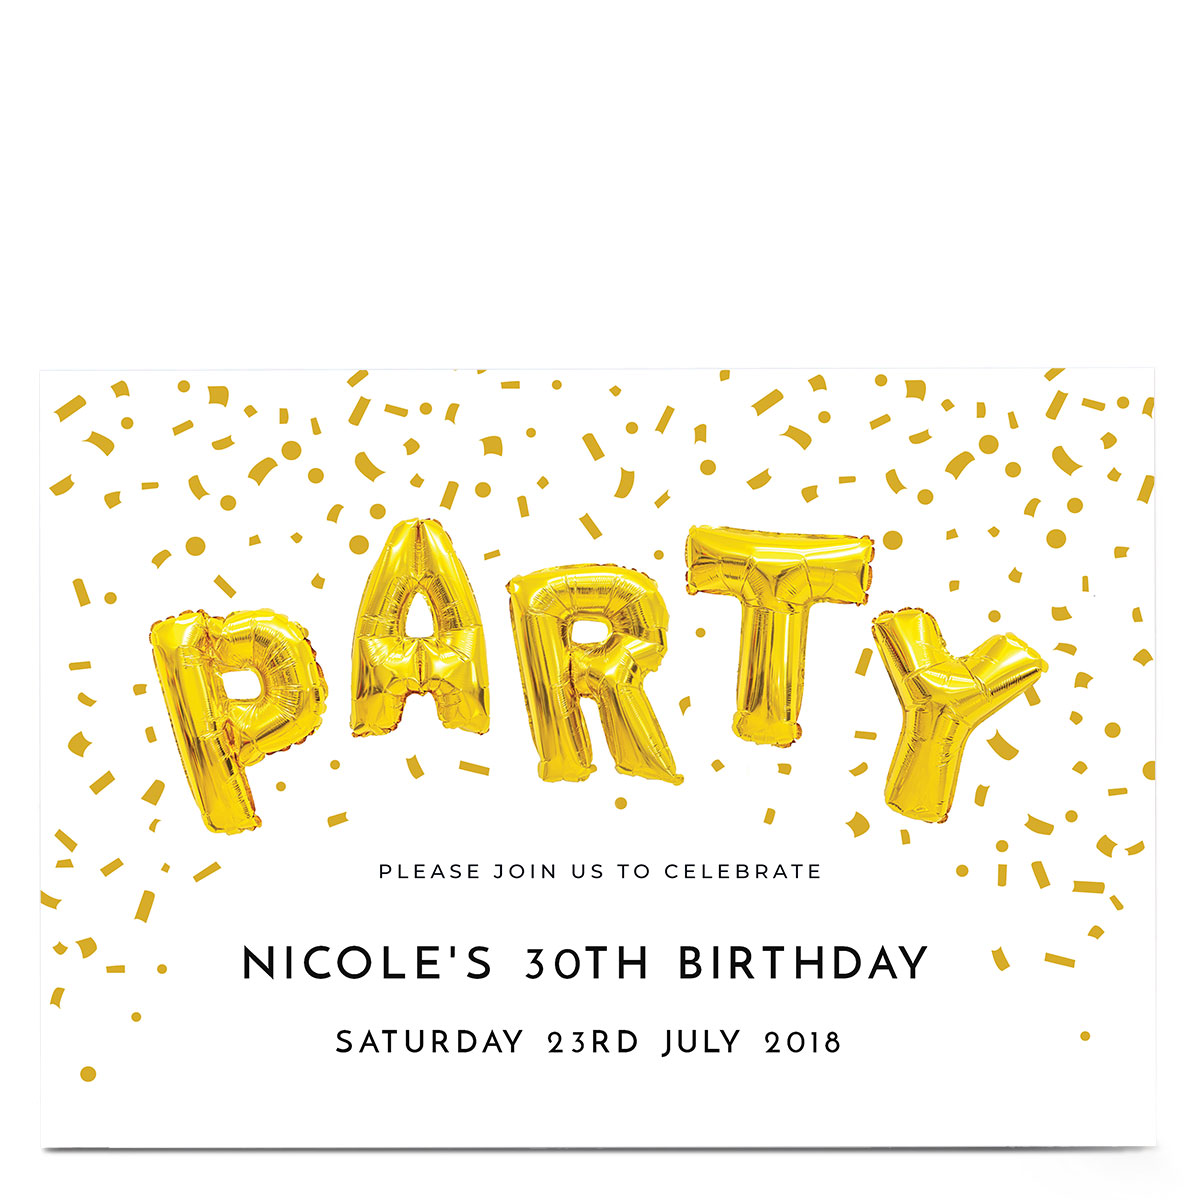 Personalised Party Invitation - Gold Party Balloons